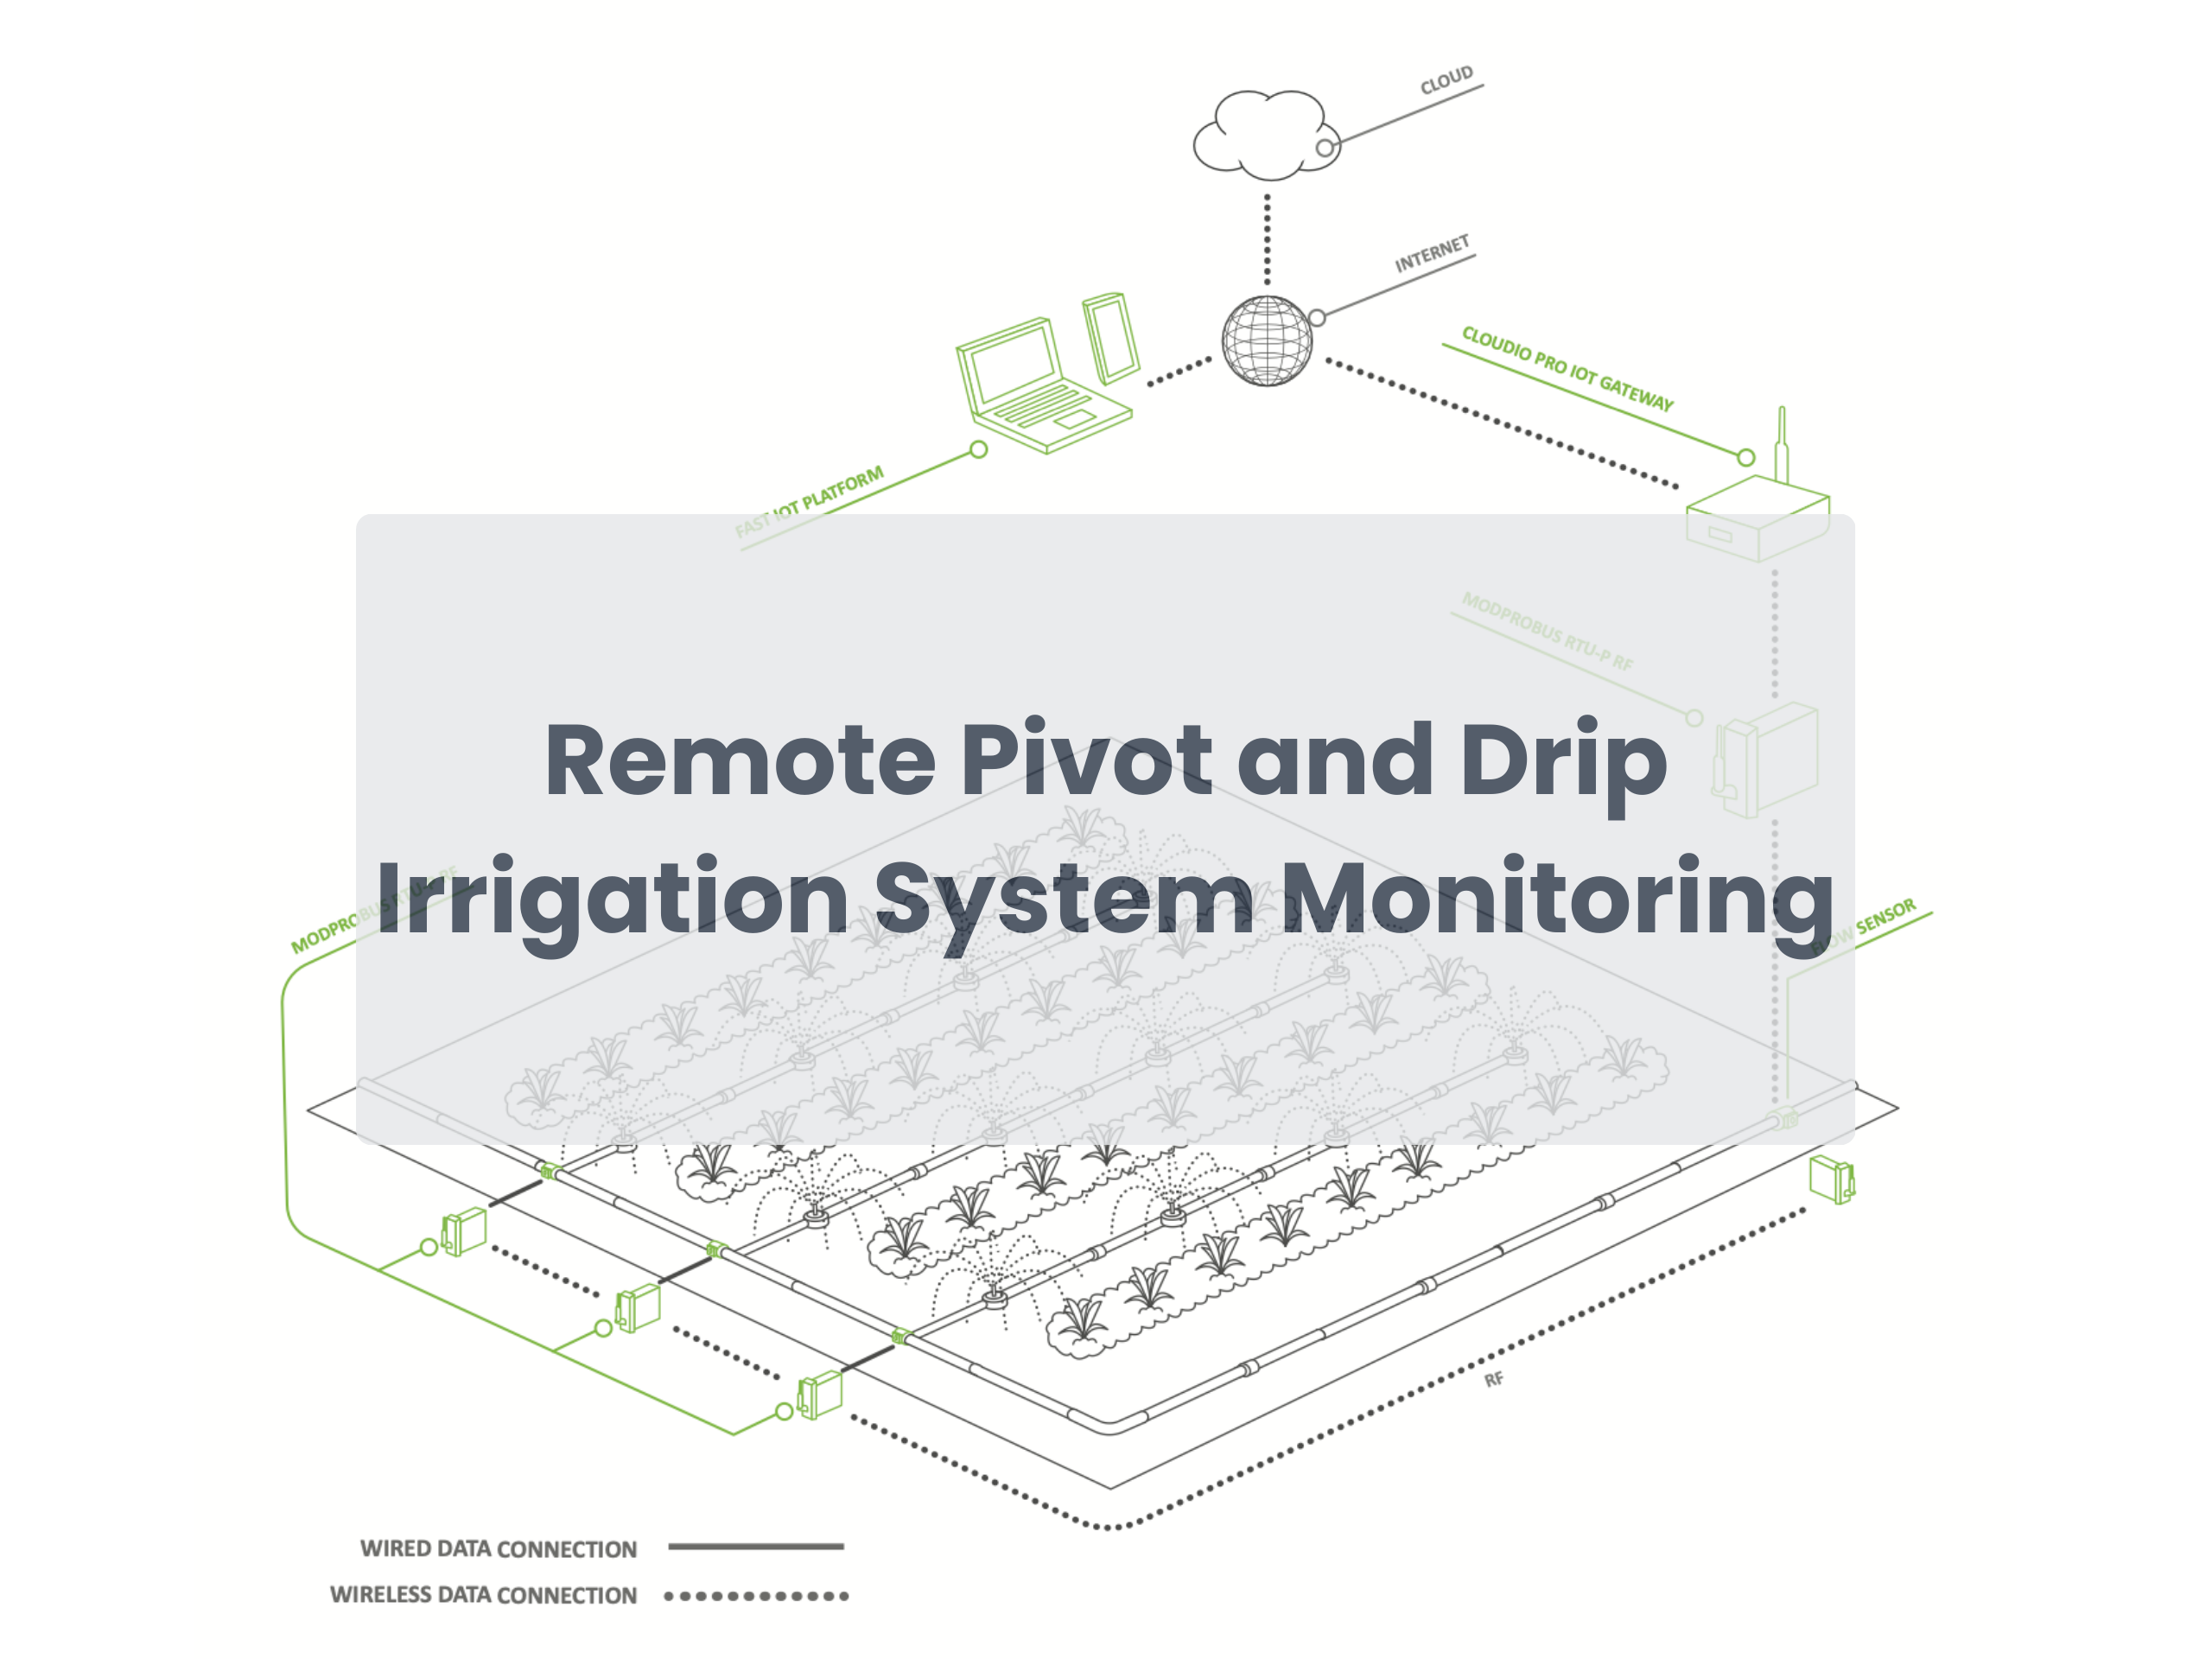 Remote Pivot and Drip Irrigation System Monitoring